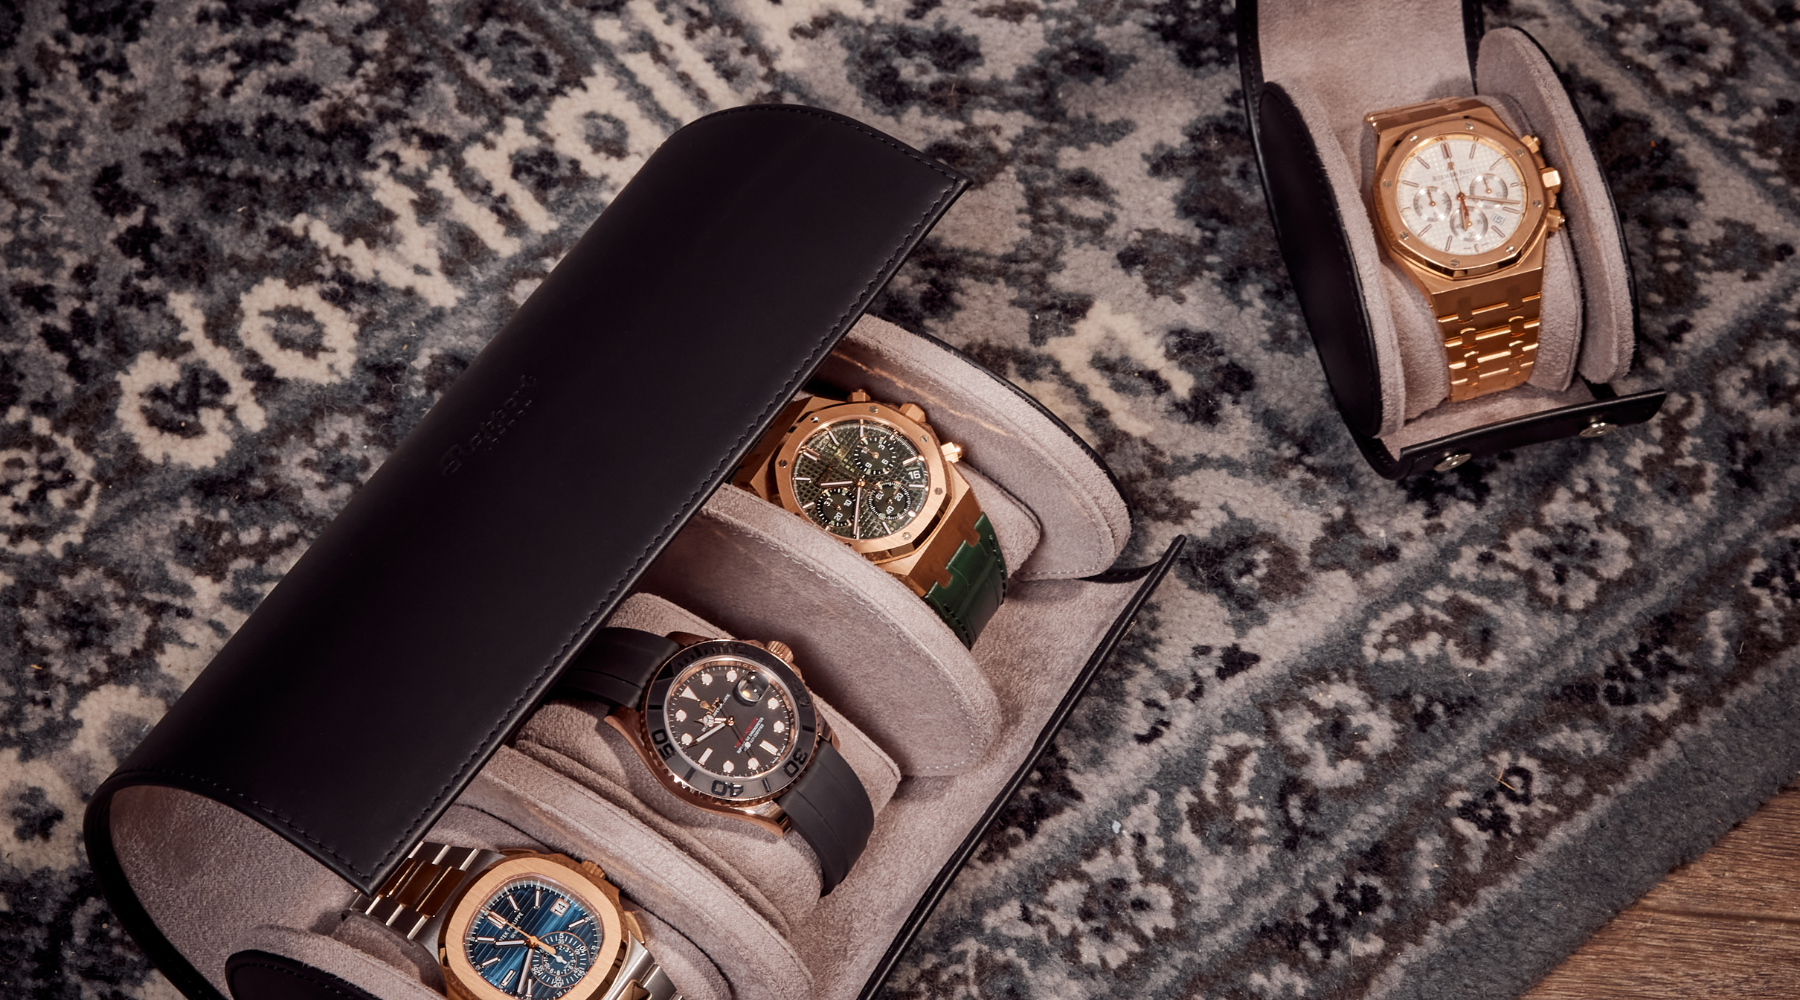 Article: Watch Winder, Watch Box or Watch Roll: What’s The Difference?